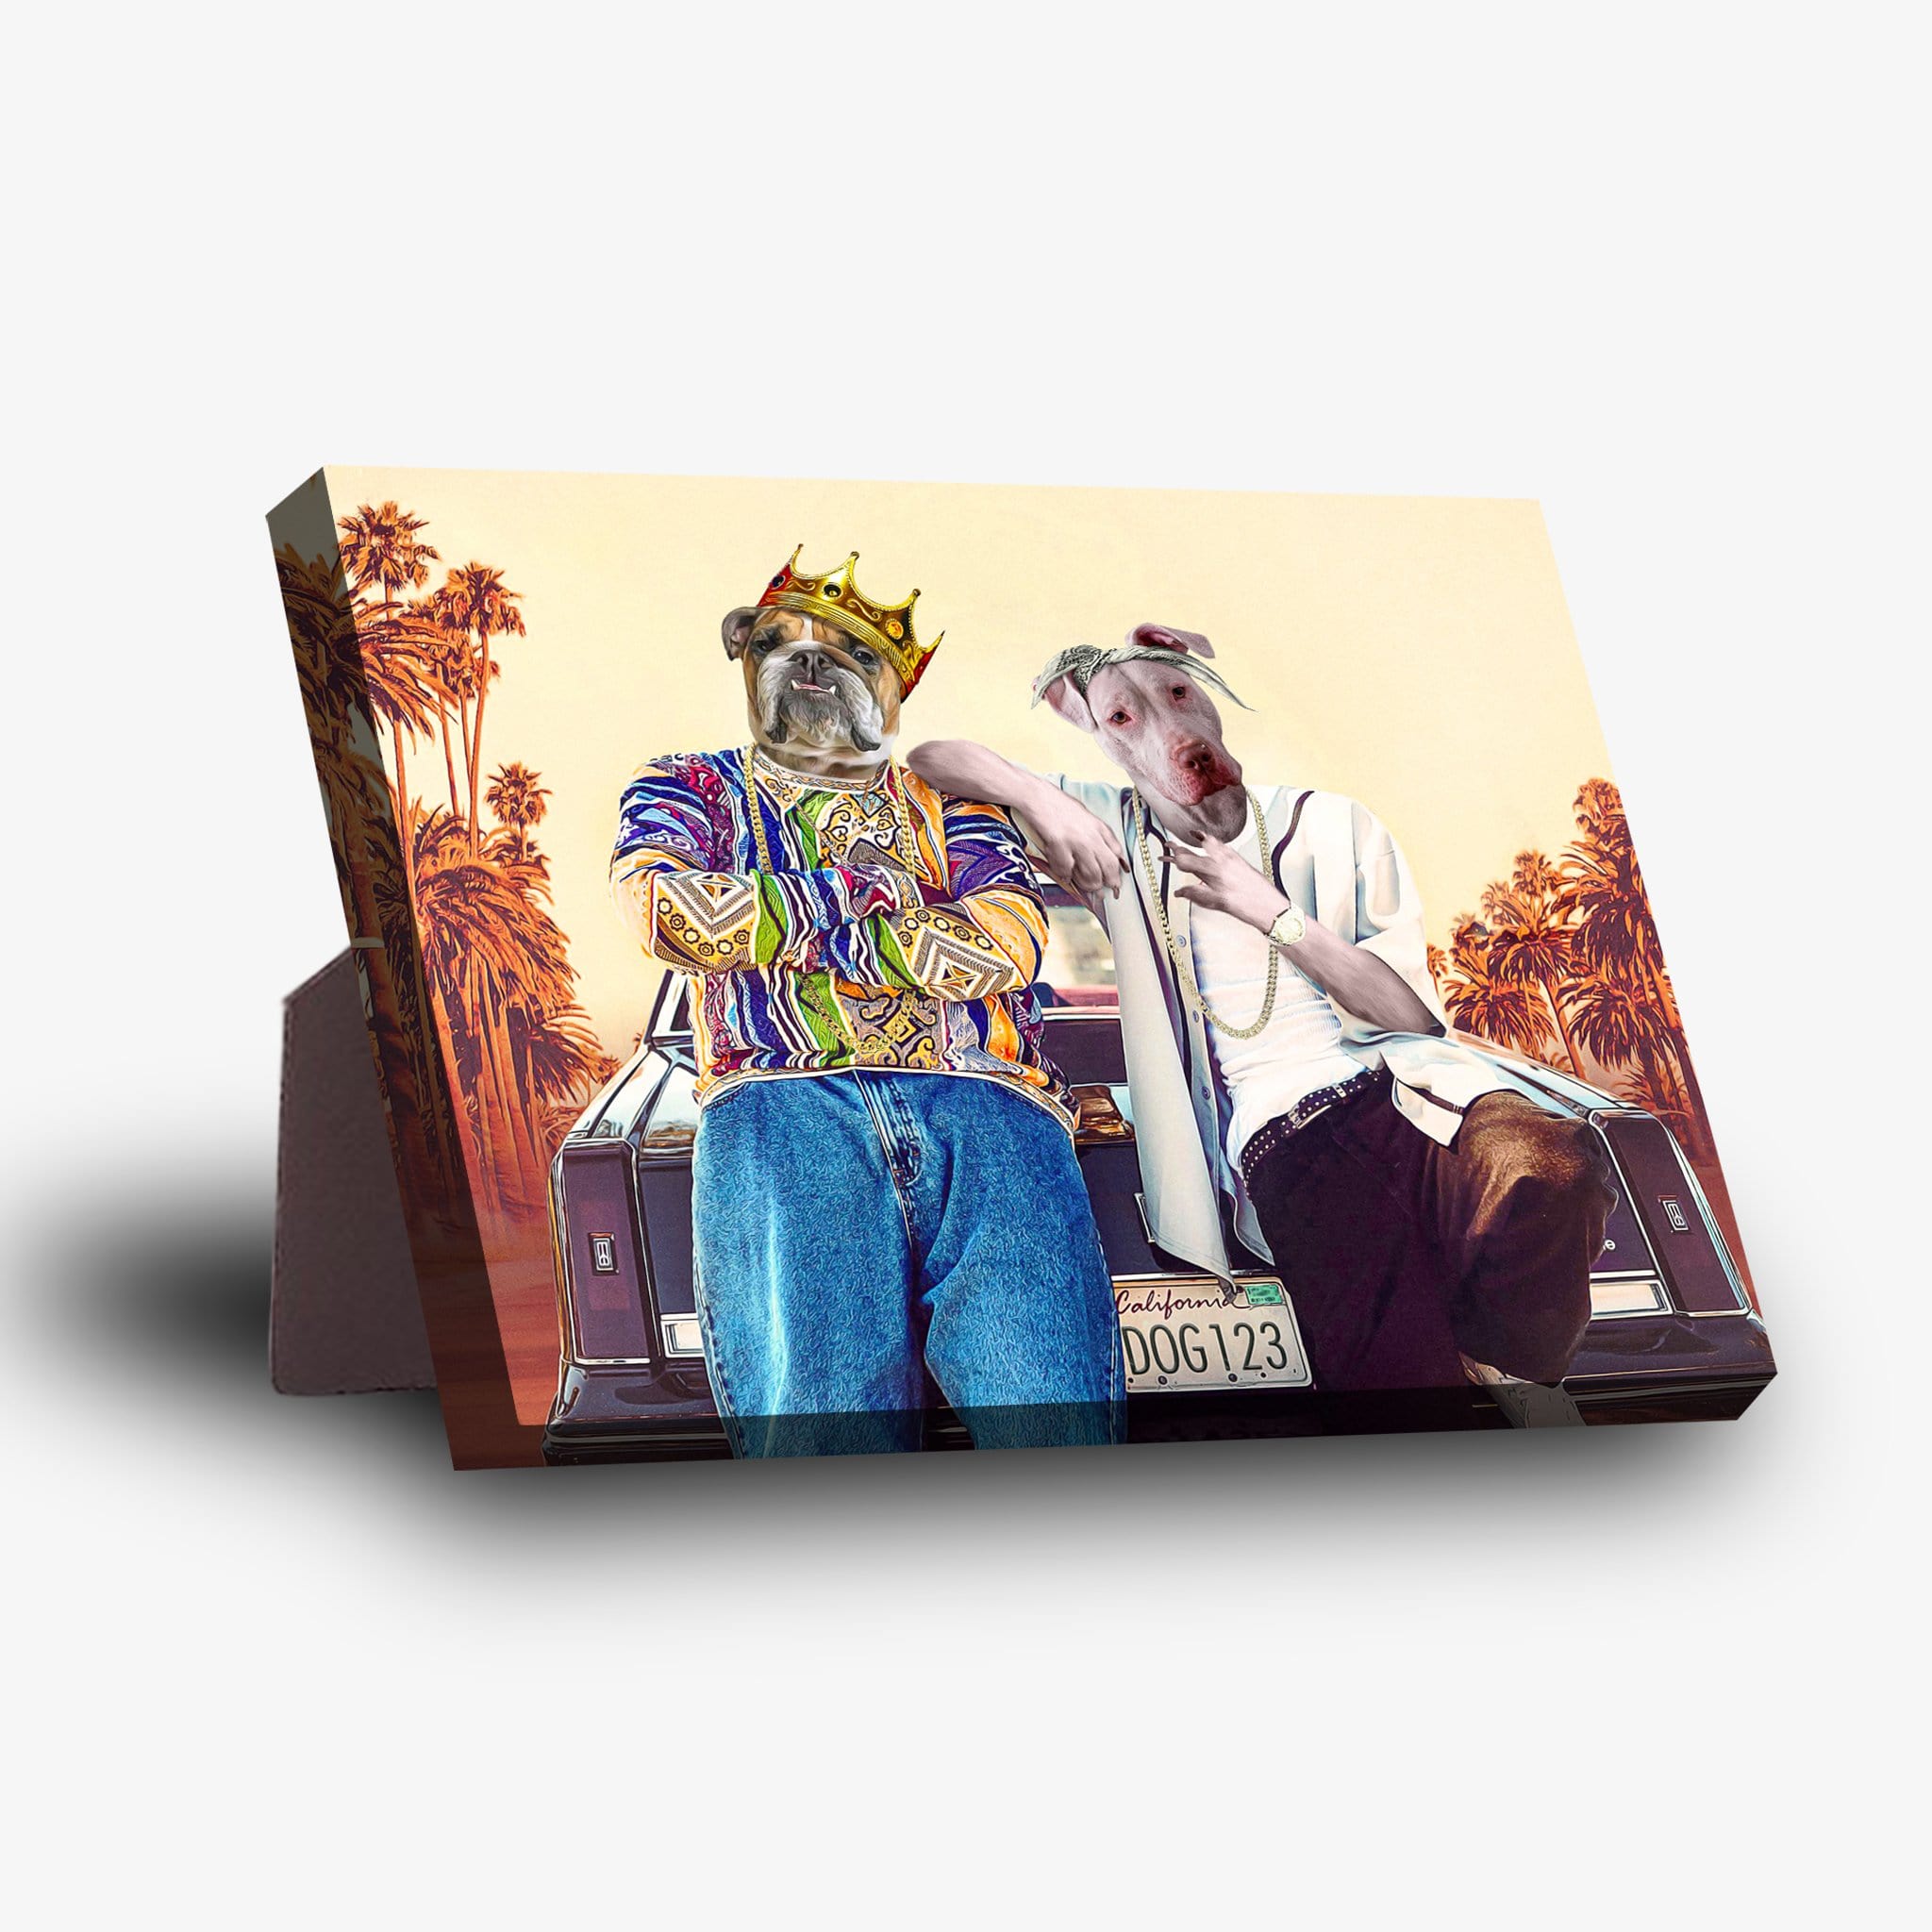 &#39;2Paw and Notorious D.O.G. California Edition&#39; Personalized 2 Pet Standing Canvas